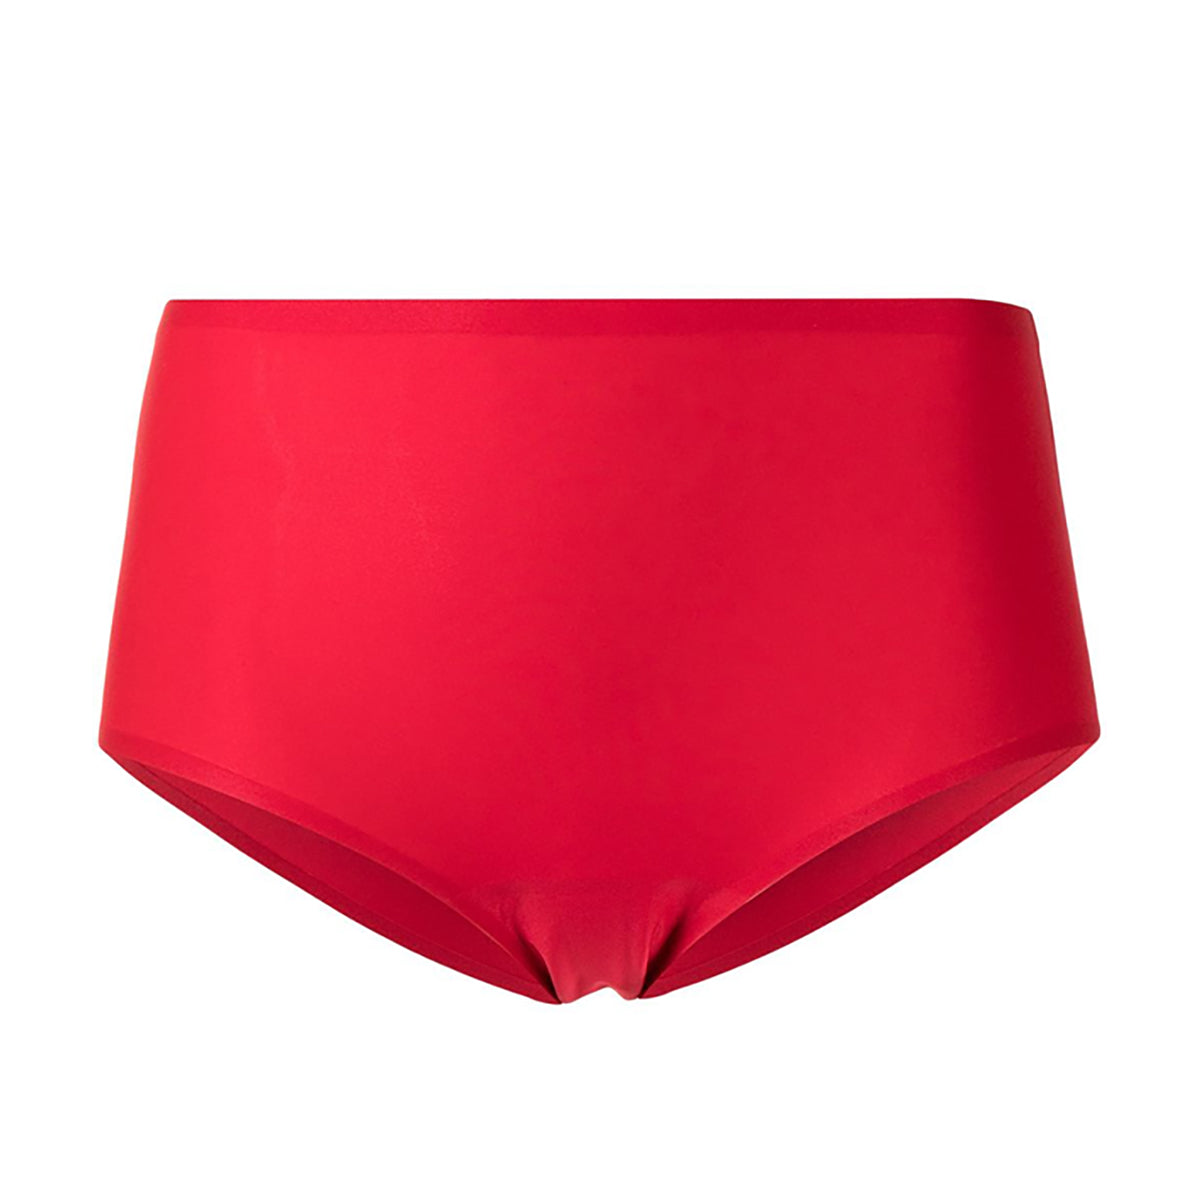 Chantelle Soft Stretch Brief 2647 in red rouge poppy seamless panty lingerie canada linea intima